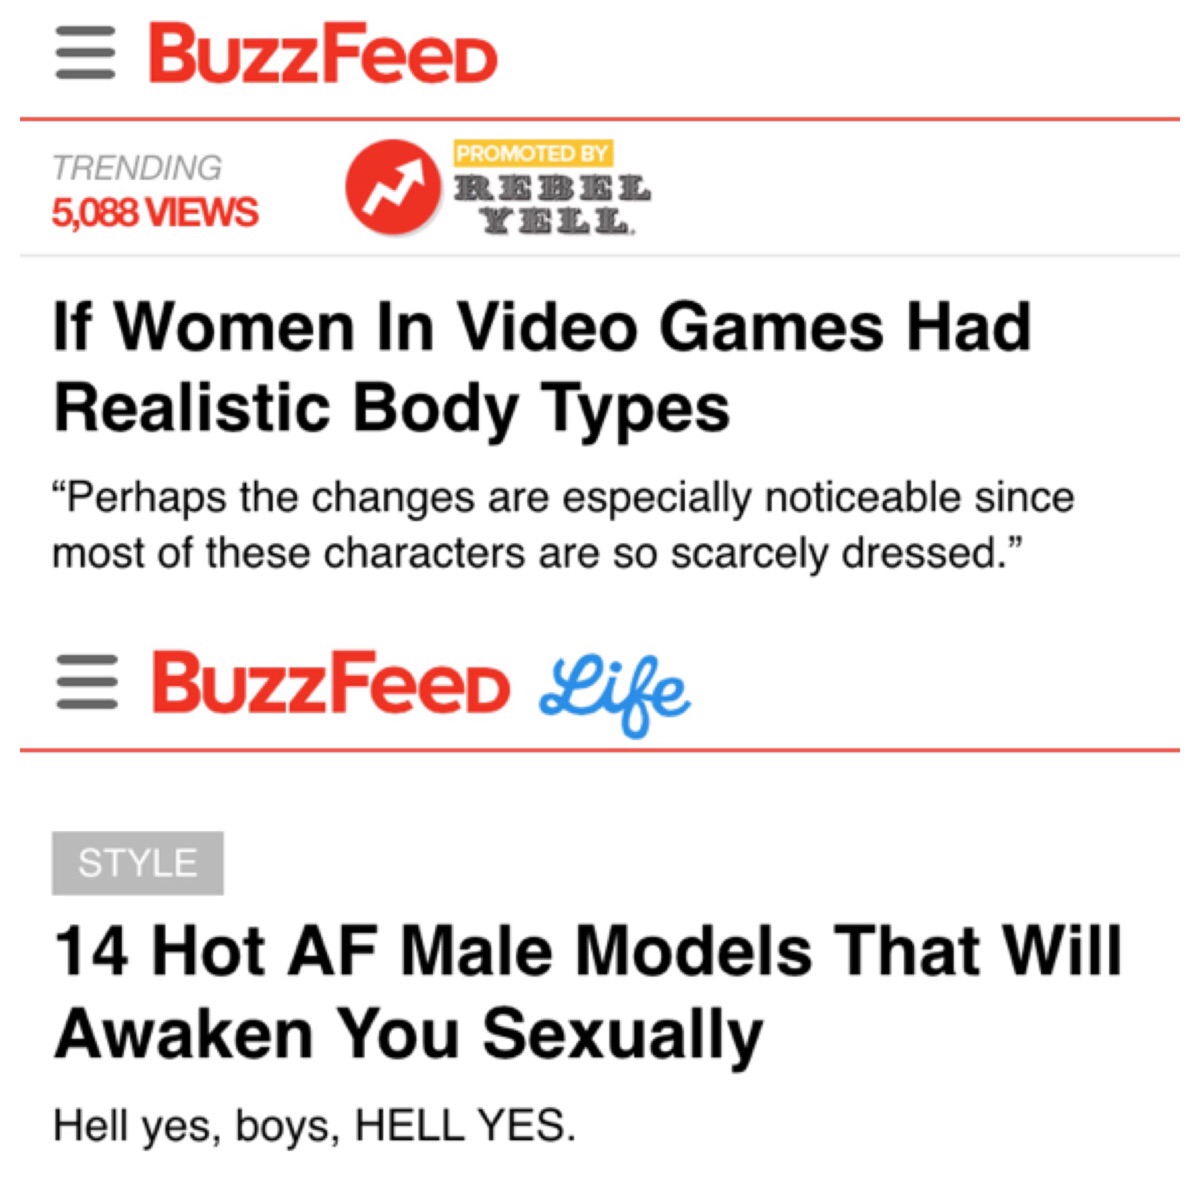 The double-standards at Buzzfeed are almost at trolling levels